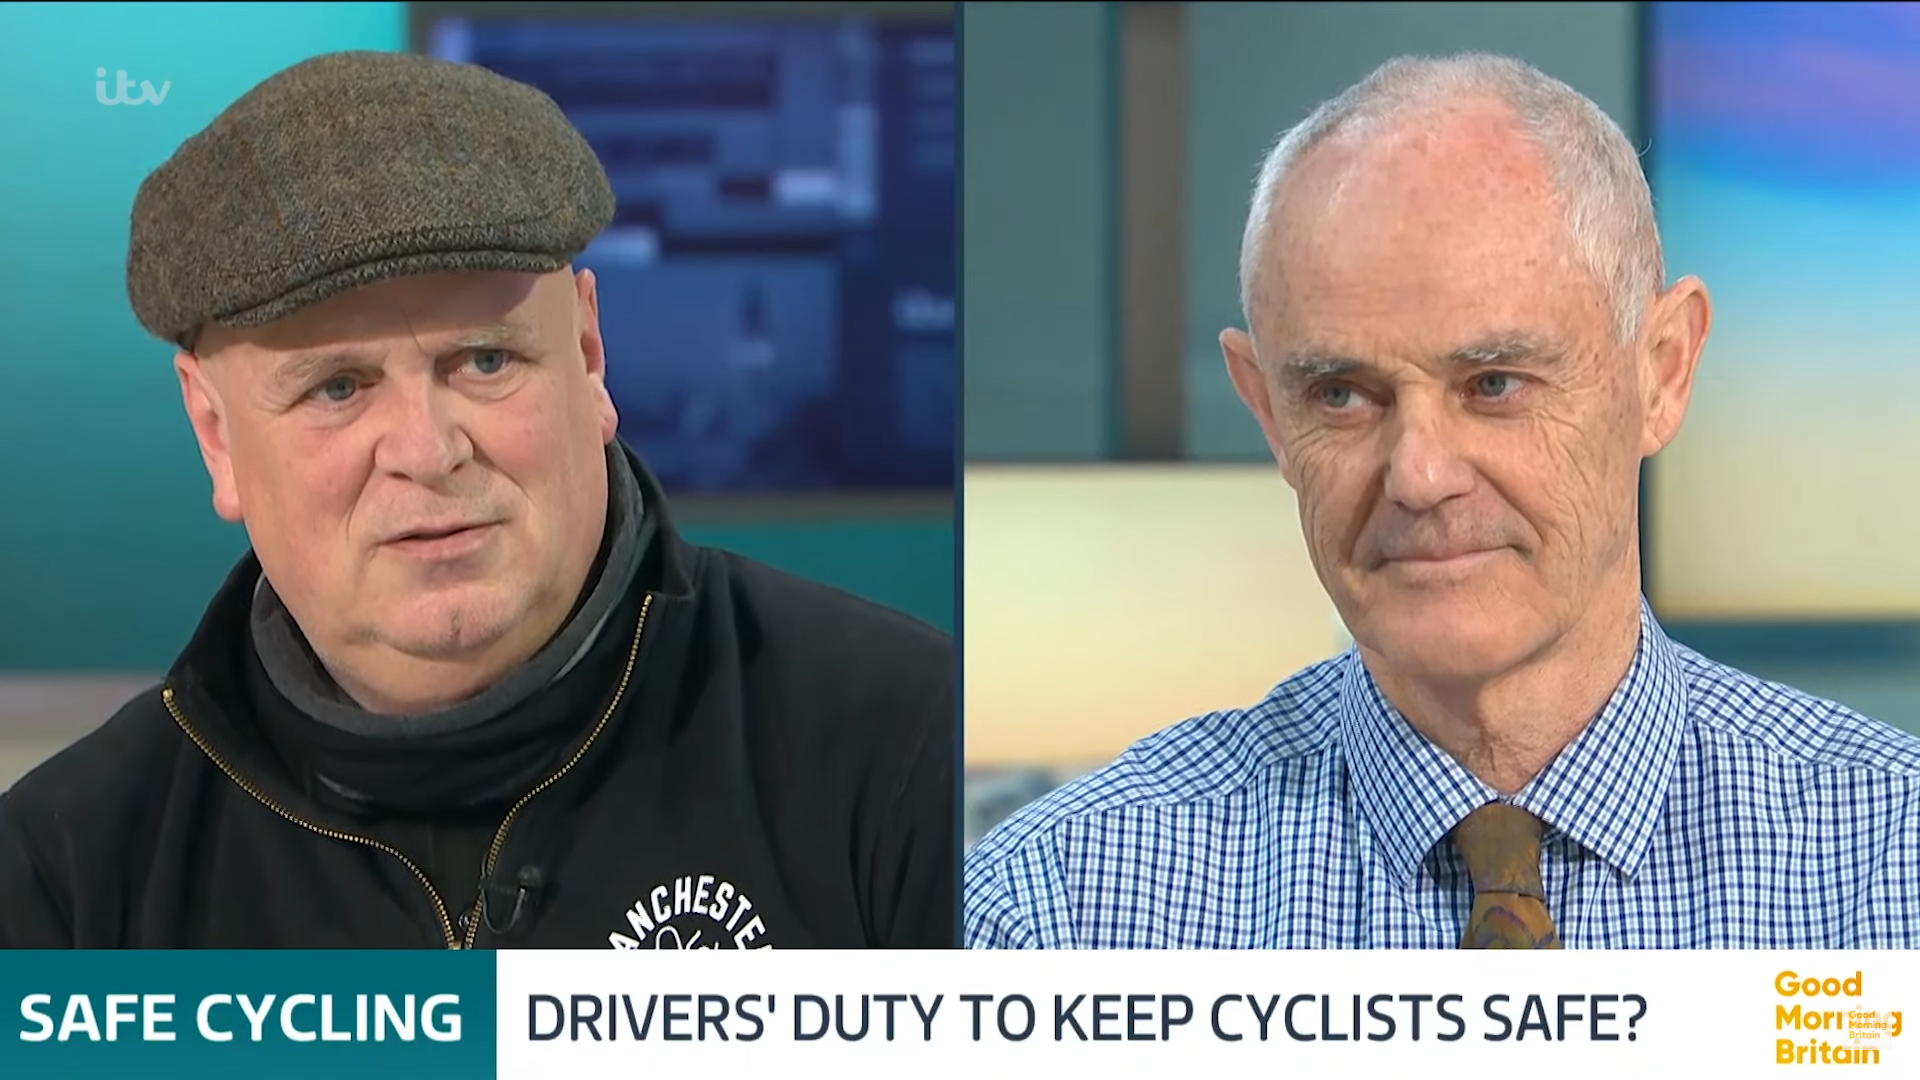 Good Morning Britain - Is It Drivers’ Responsibility to Keep Cyclists Safe on the Roads?